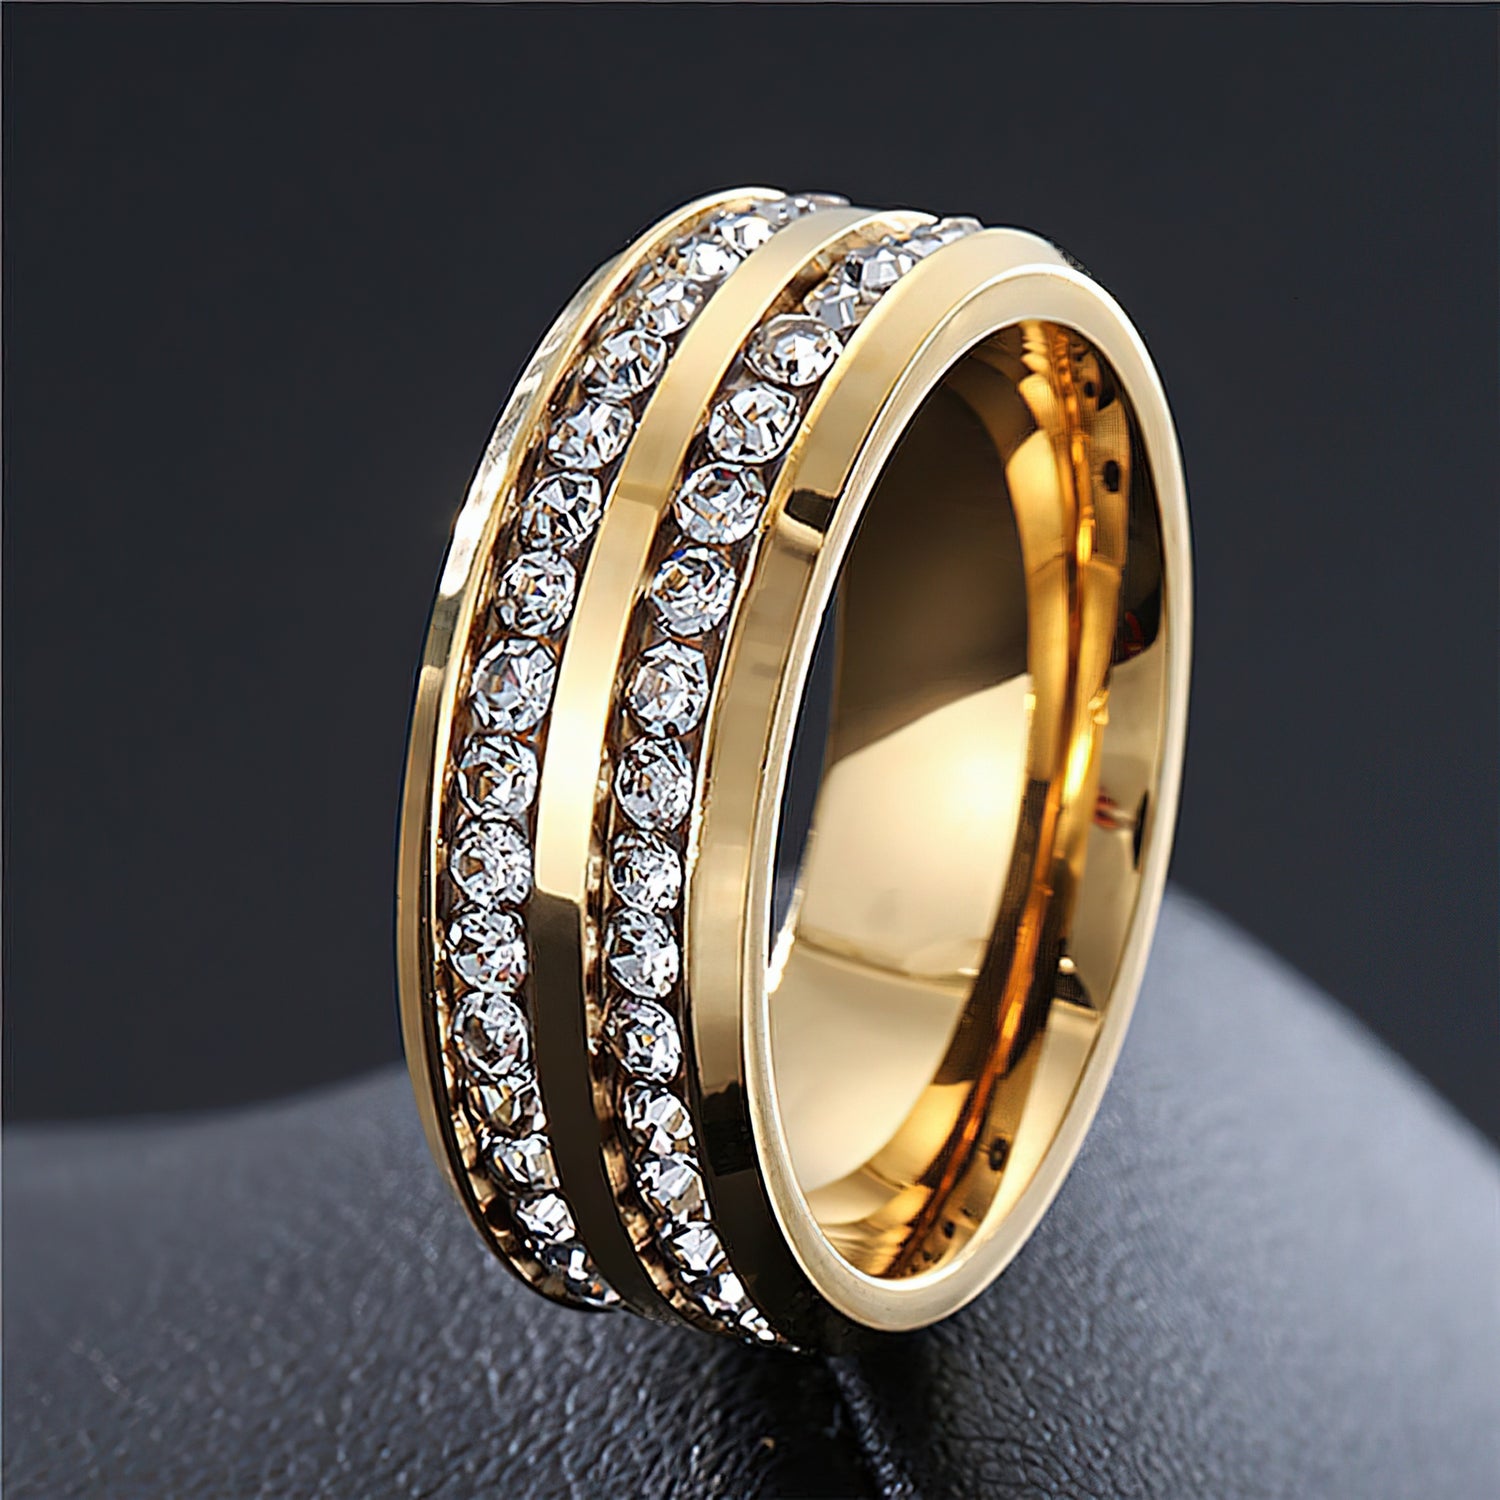 Man's Double Row Bling Ring